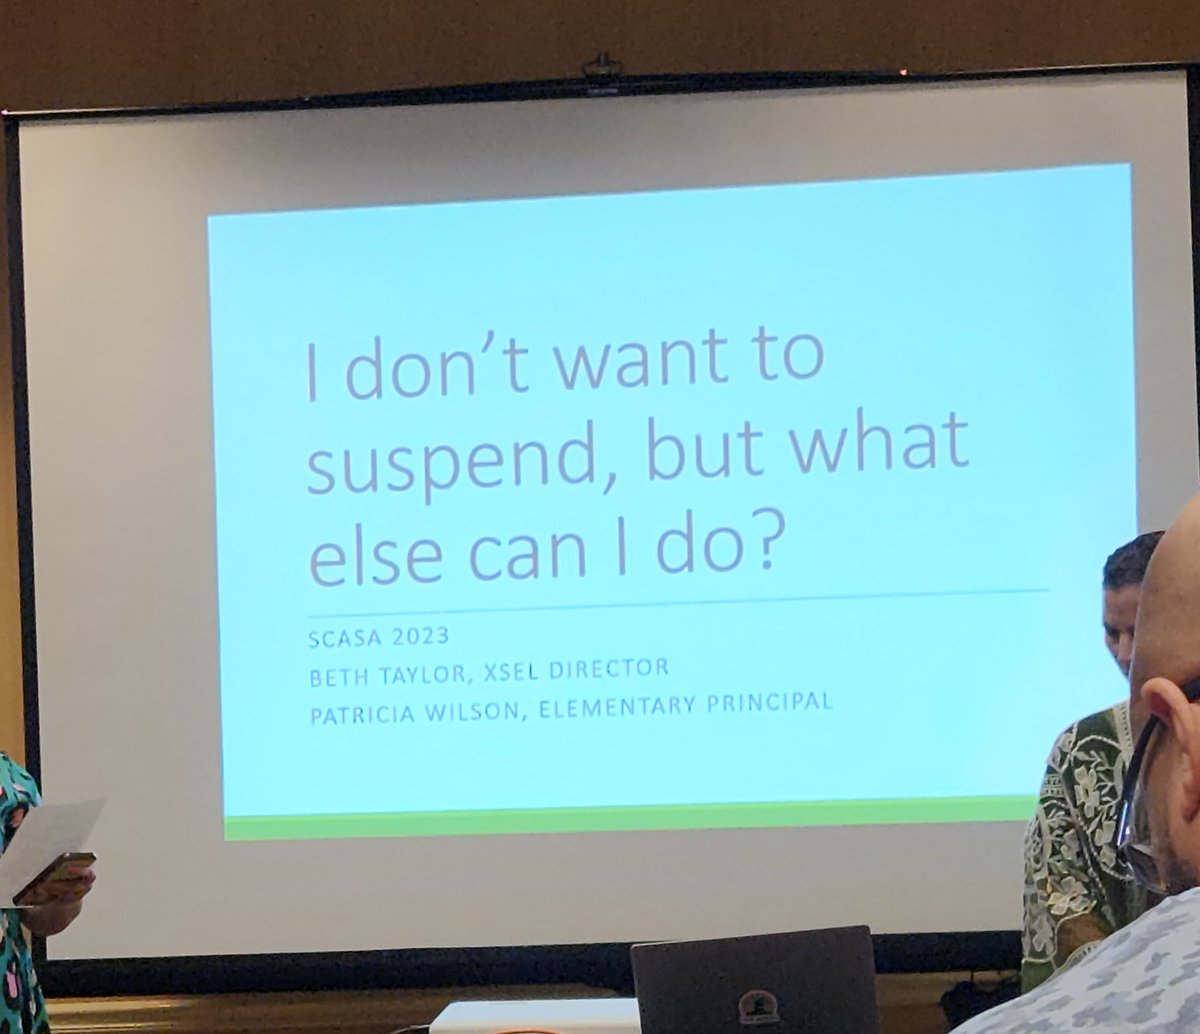 There are two things I'm not a fan of: suspensions and retention. There must be alternatives! I am excited to see what the presenters will share about countering suspensions. #SCASAi3